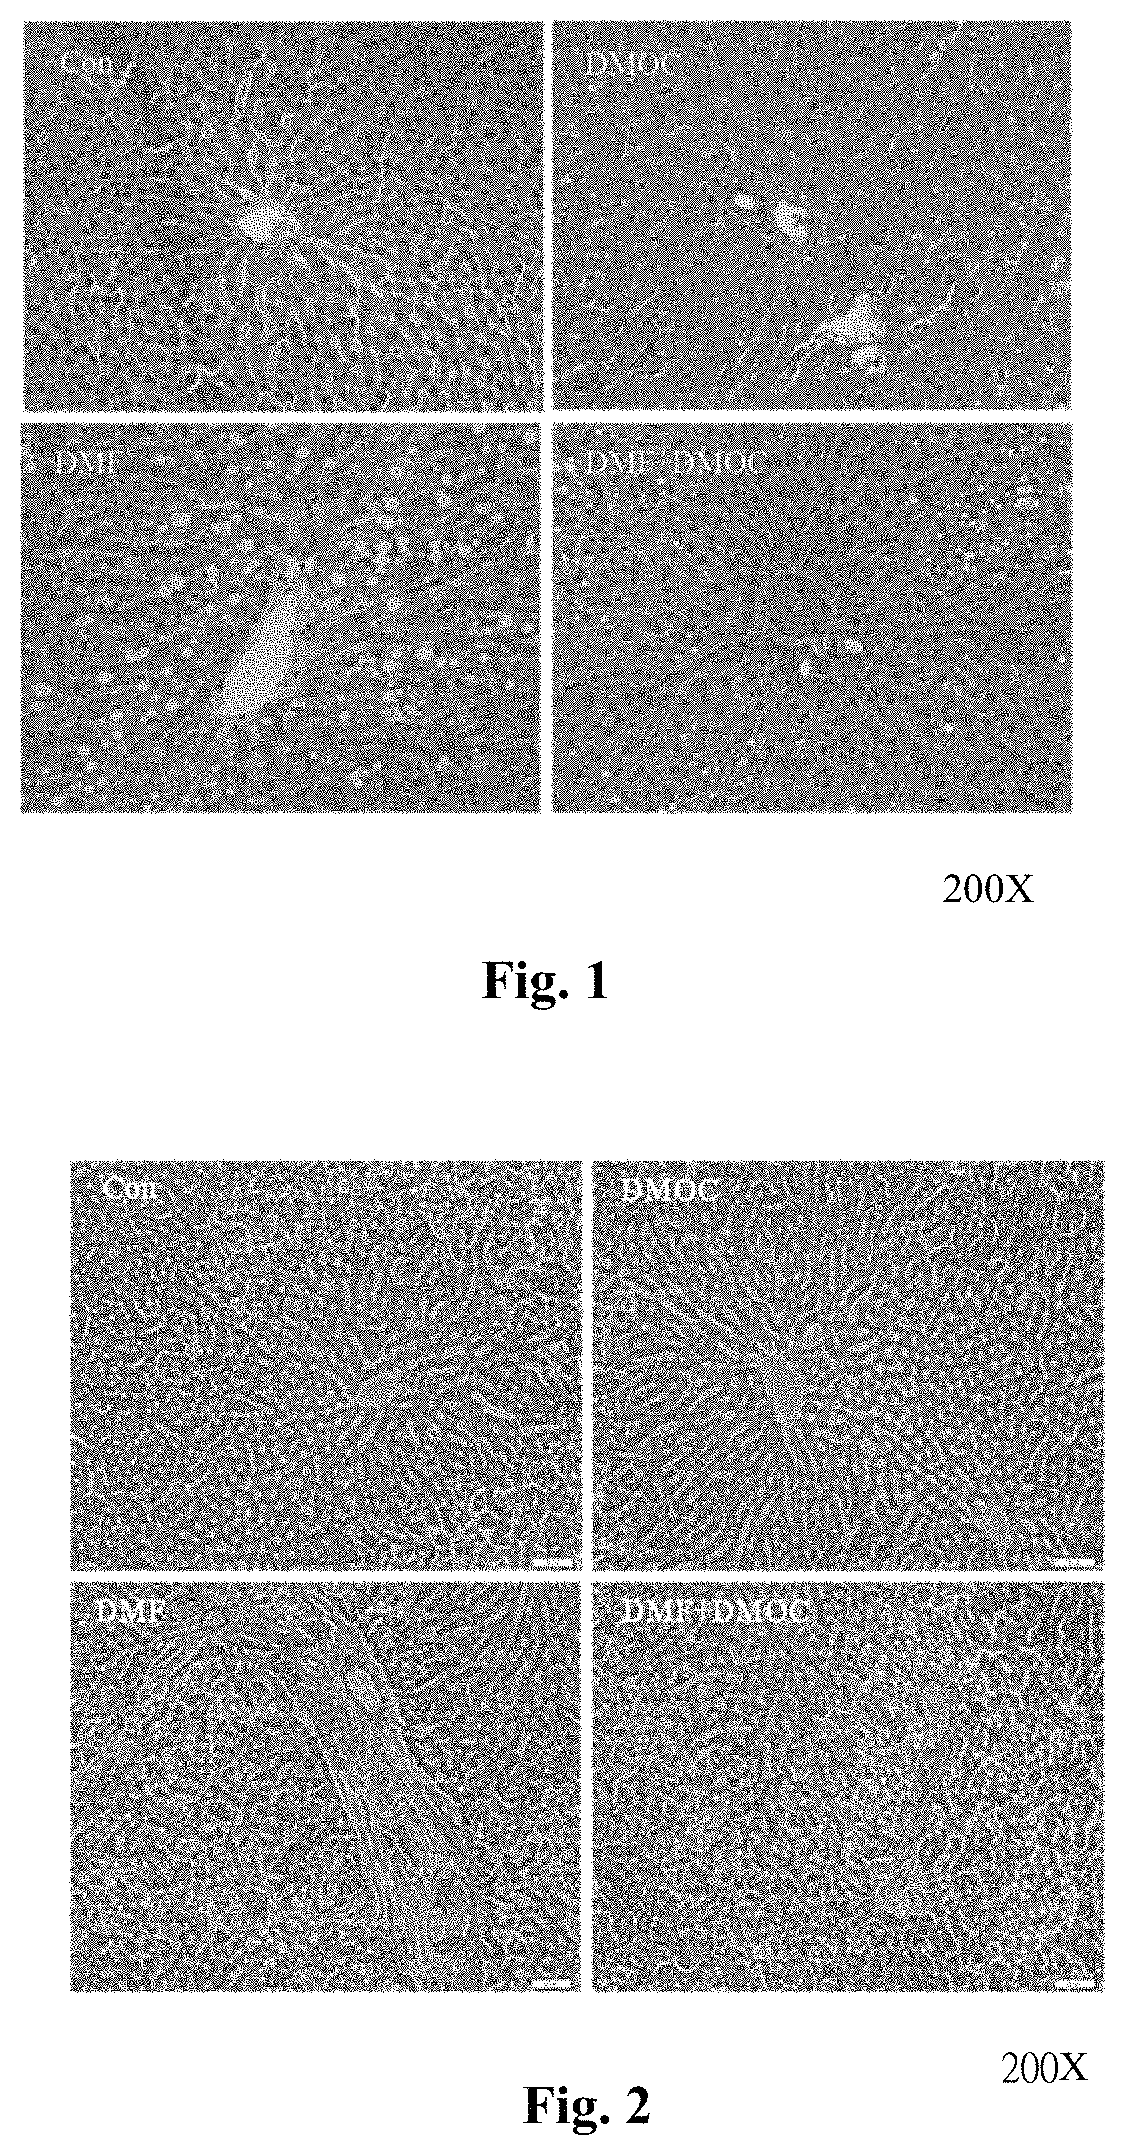 Herbal compound extract to moderate diabetes with liver necrosis and fibrosis and use thereof